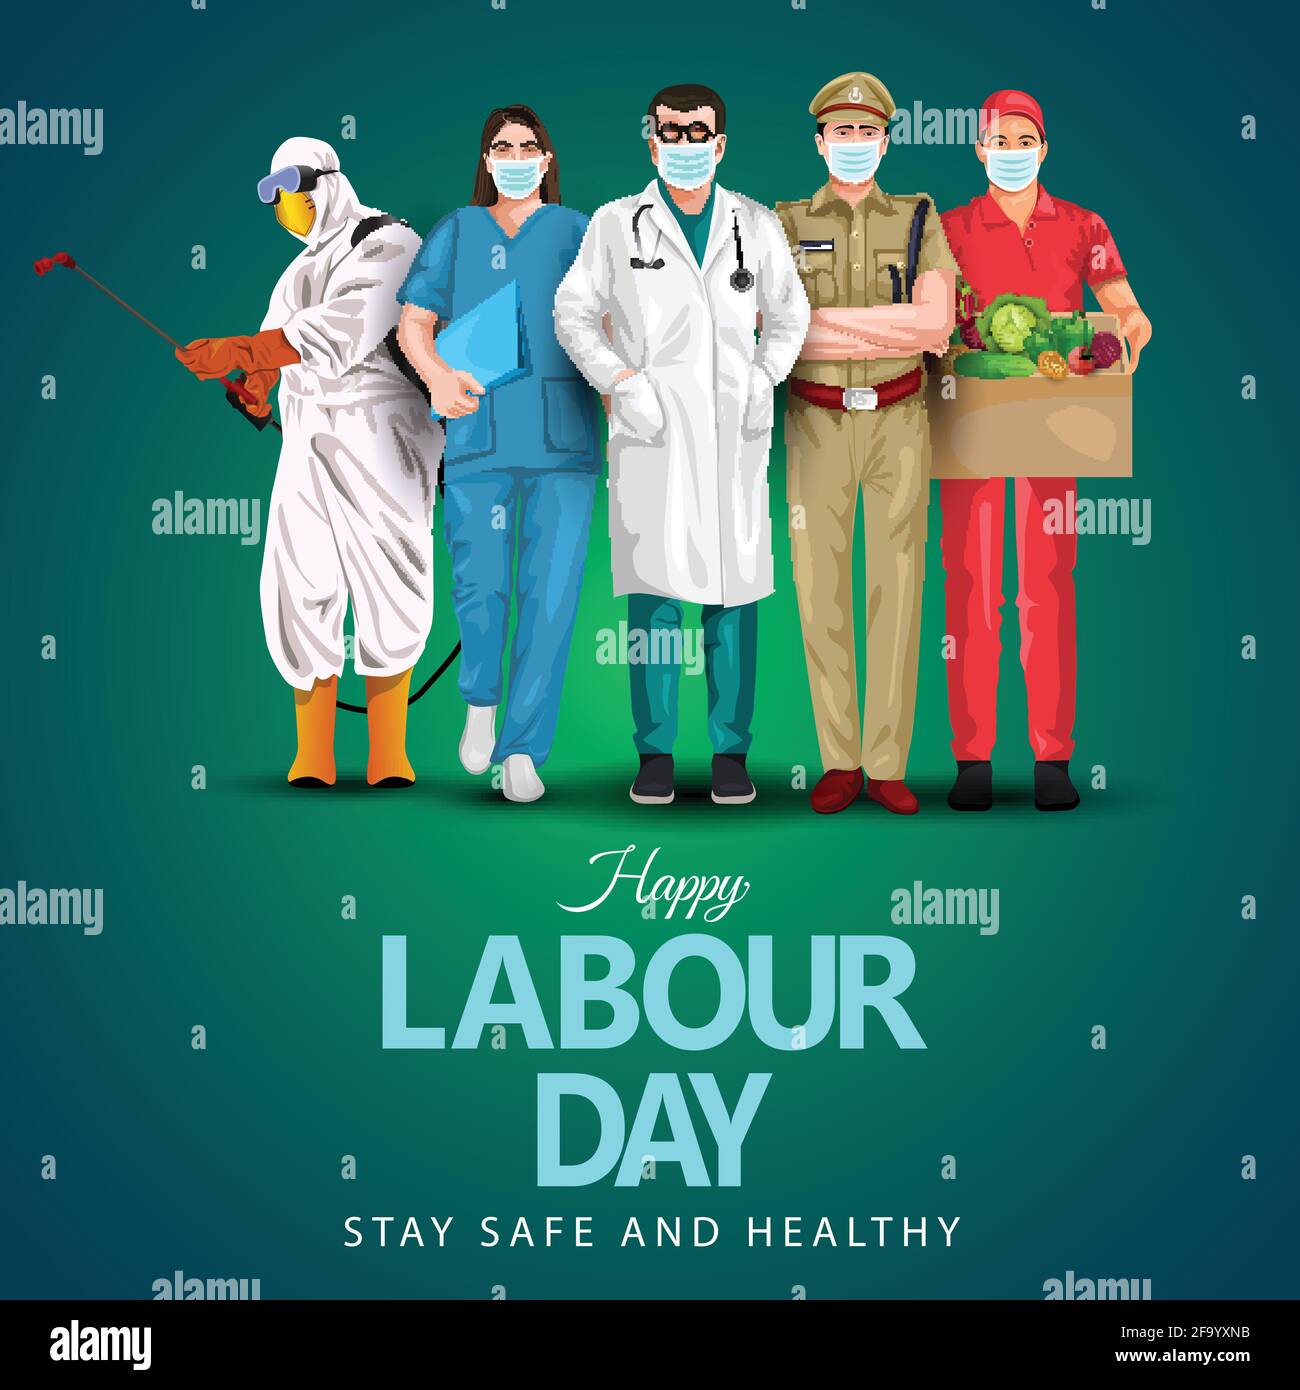 A Group Of People Of Different Professions. Doctor,business man, worker. Set of occupations. Labour Day On 1 May. coronavirus, covid-19 concept. vecto Stock Vector